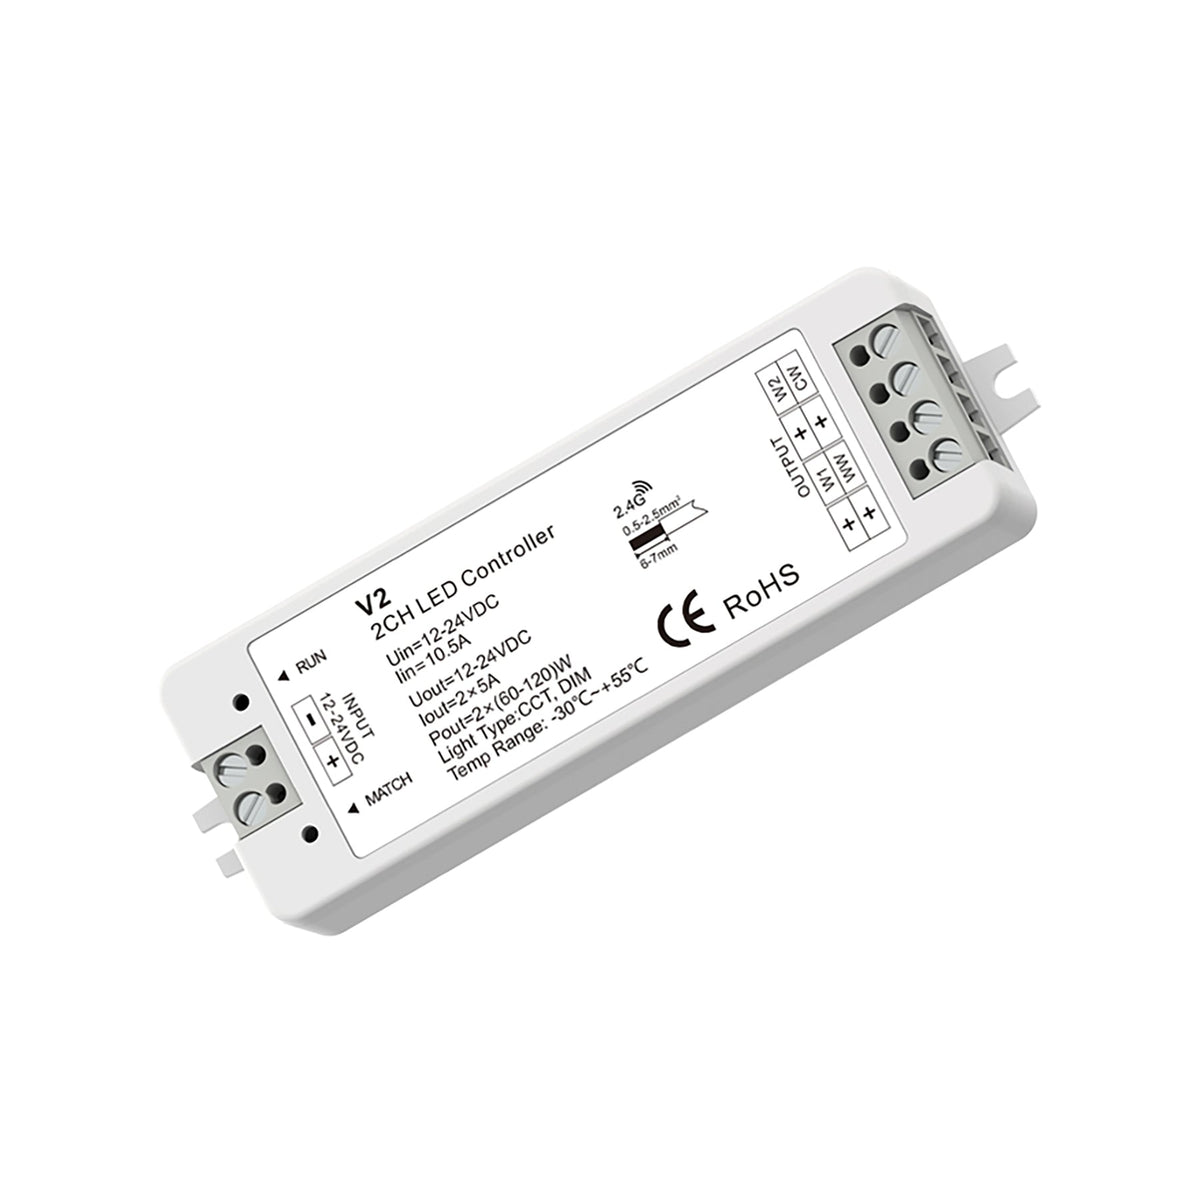 G.W.S. LED LED 12-24V DC CCT Controller V2 + 1 Zone Panel Remote Control 1*CR2032 Battery TW2